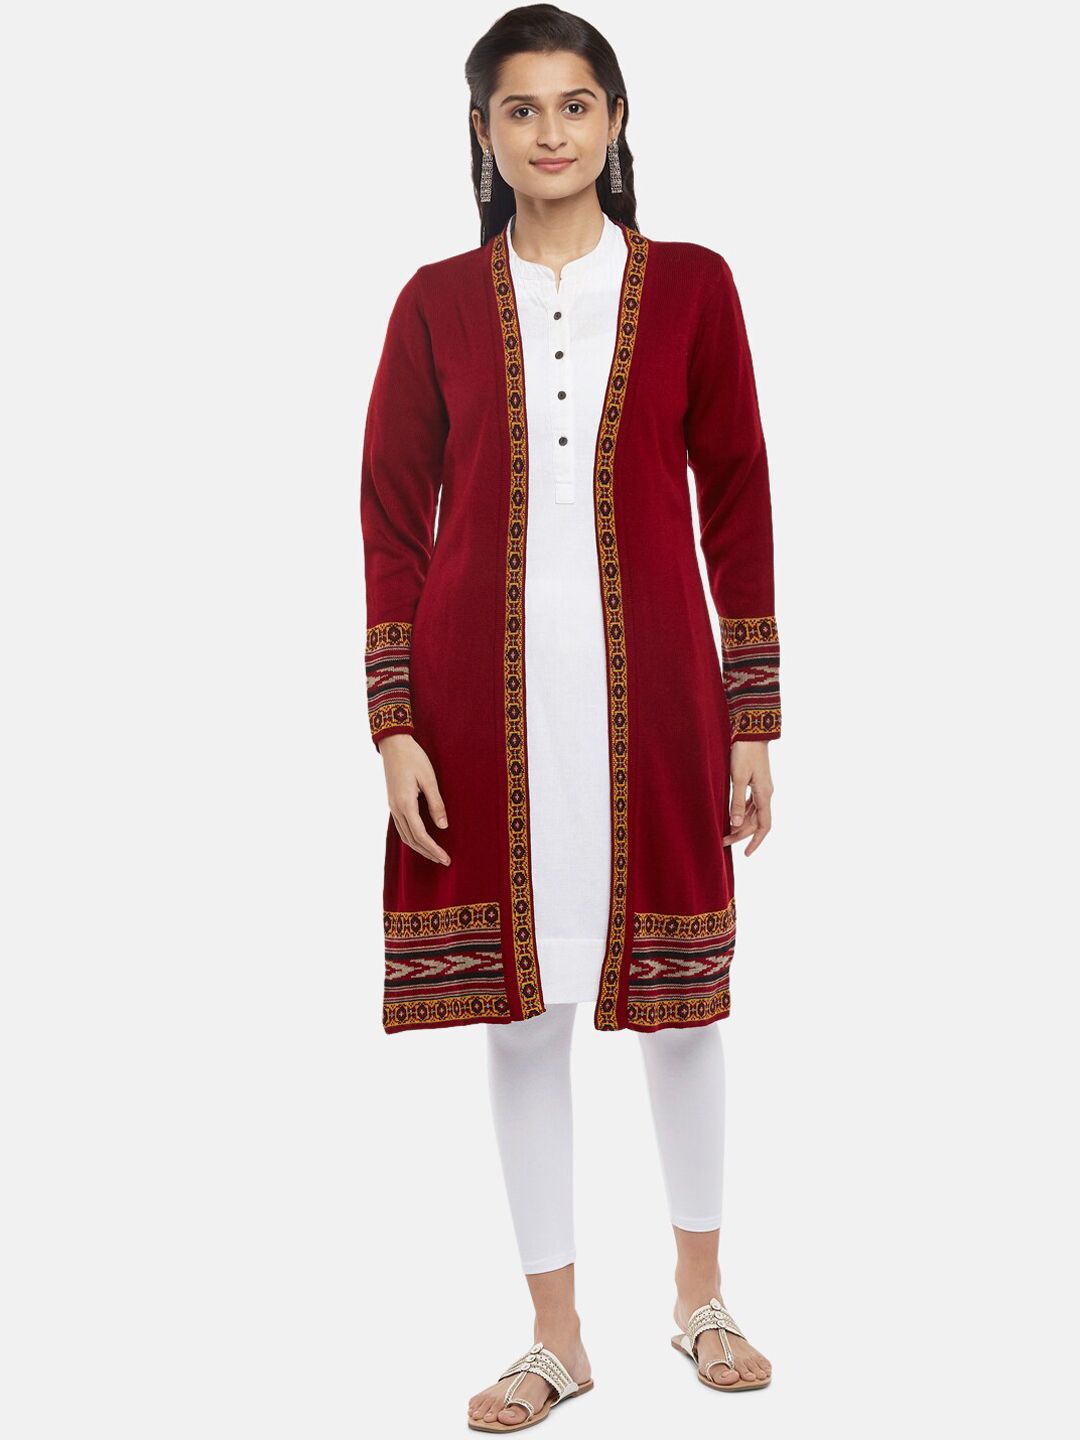 RANGMANCH BY PANTALOONS Women Red Geometric Acrylic Longline Open Front Jacket Price in India